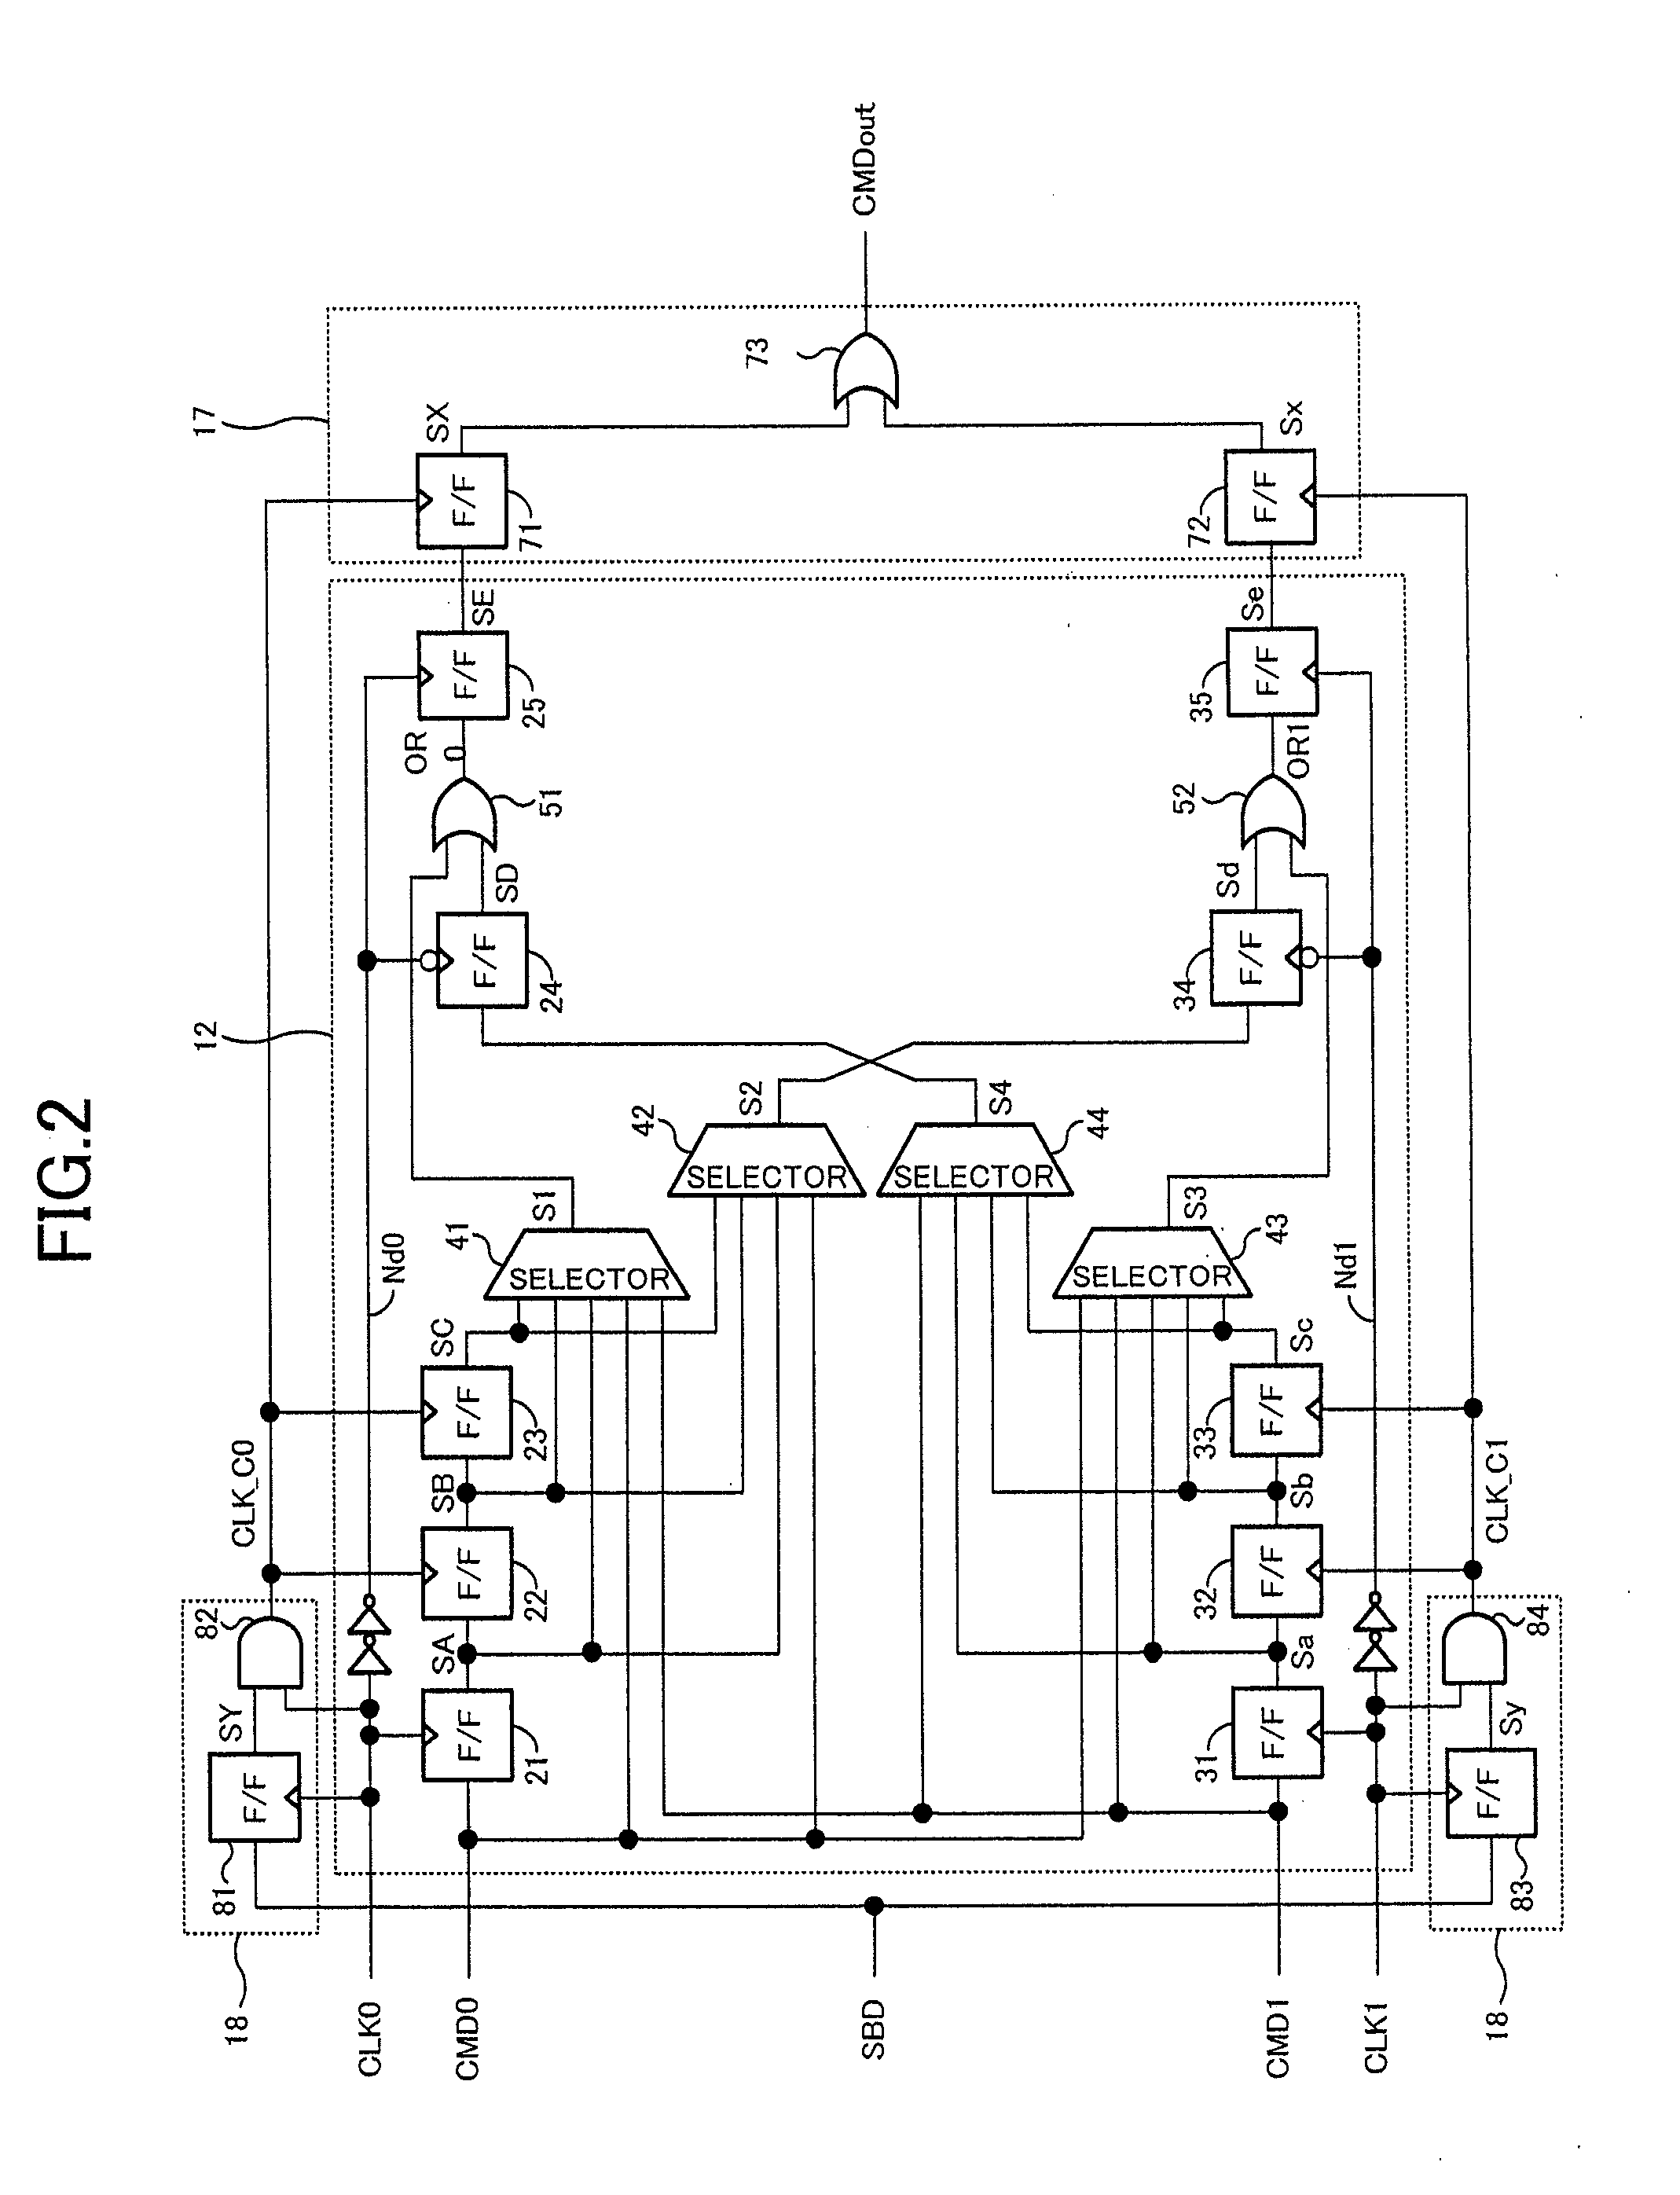 Semiconductor device having latency counter